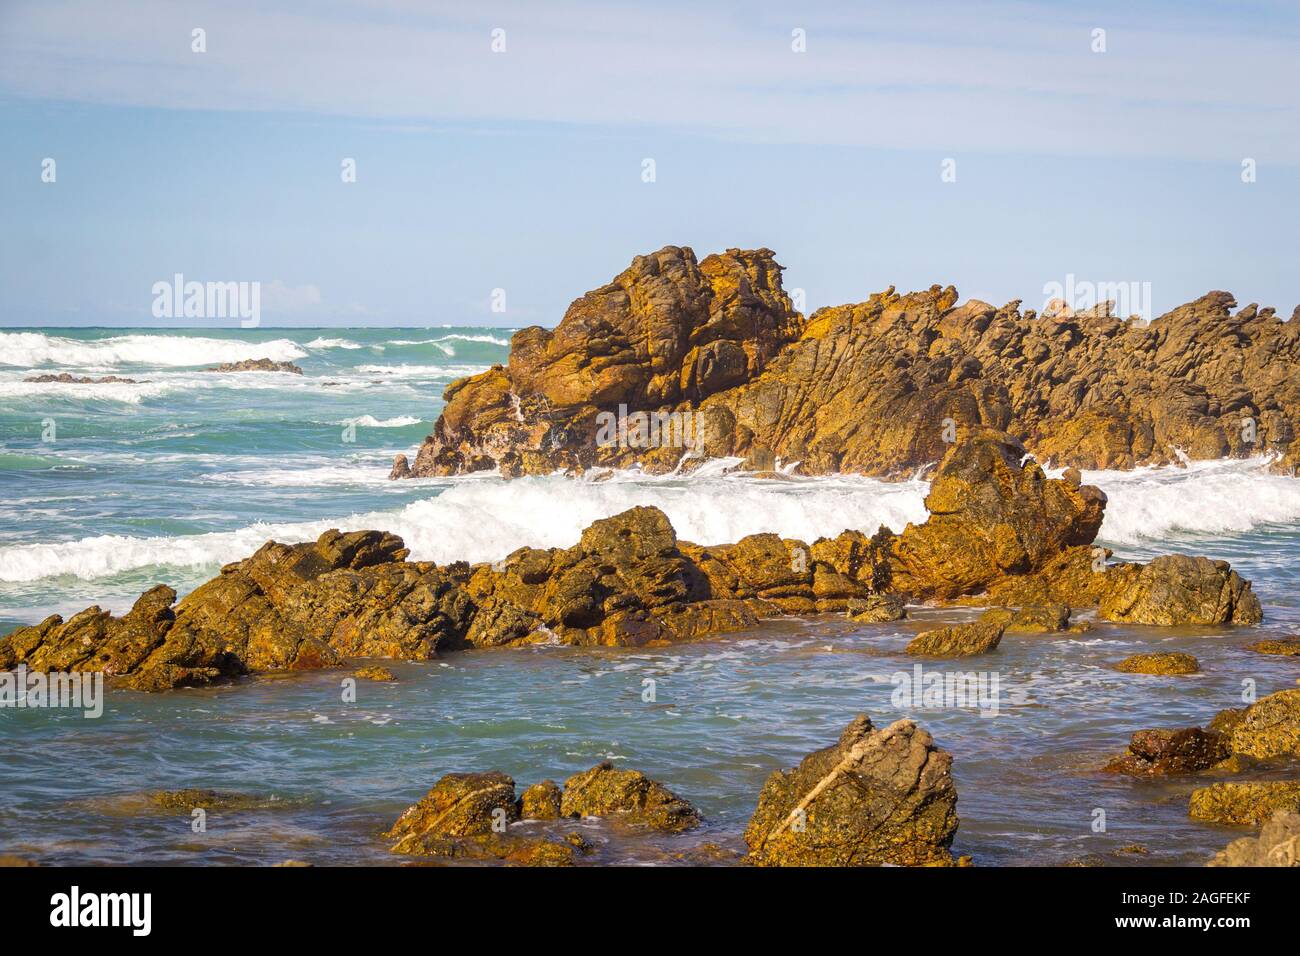 Cape Agulhas (also known as Cape of the Needles) - the southern-most tip of Africa, rocky coastline where Atlantic and Indian Oceans meet Stock Photo